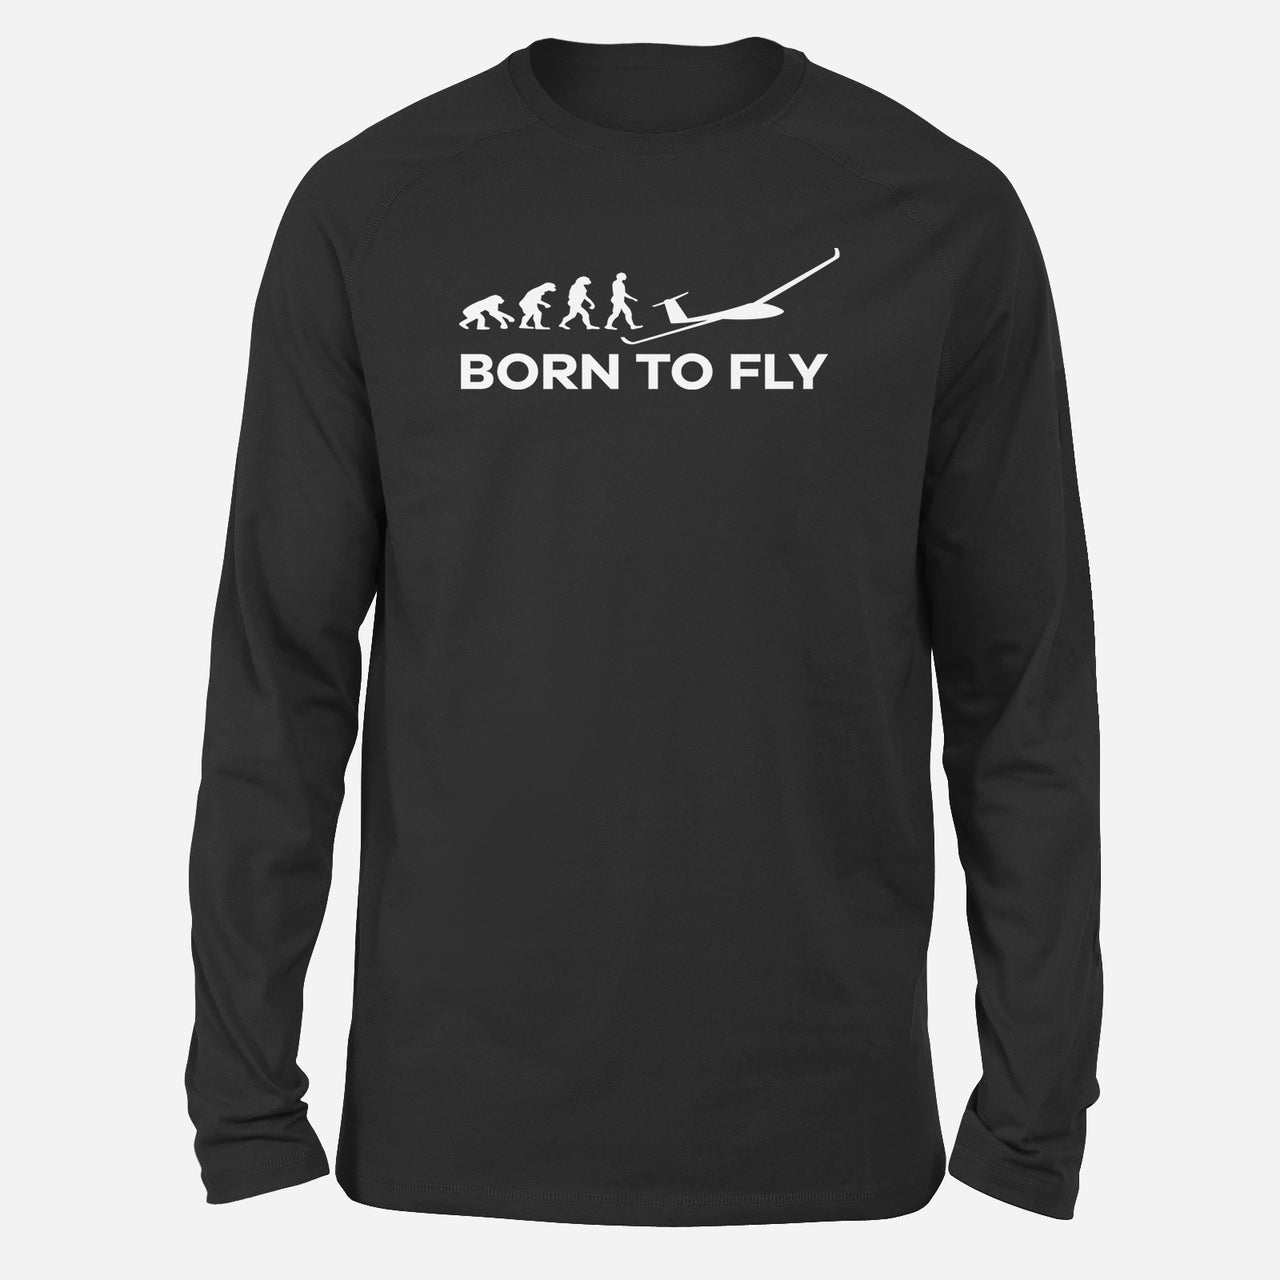 Born To Fly Glider Designed Long-Sleeve T-Shirts